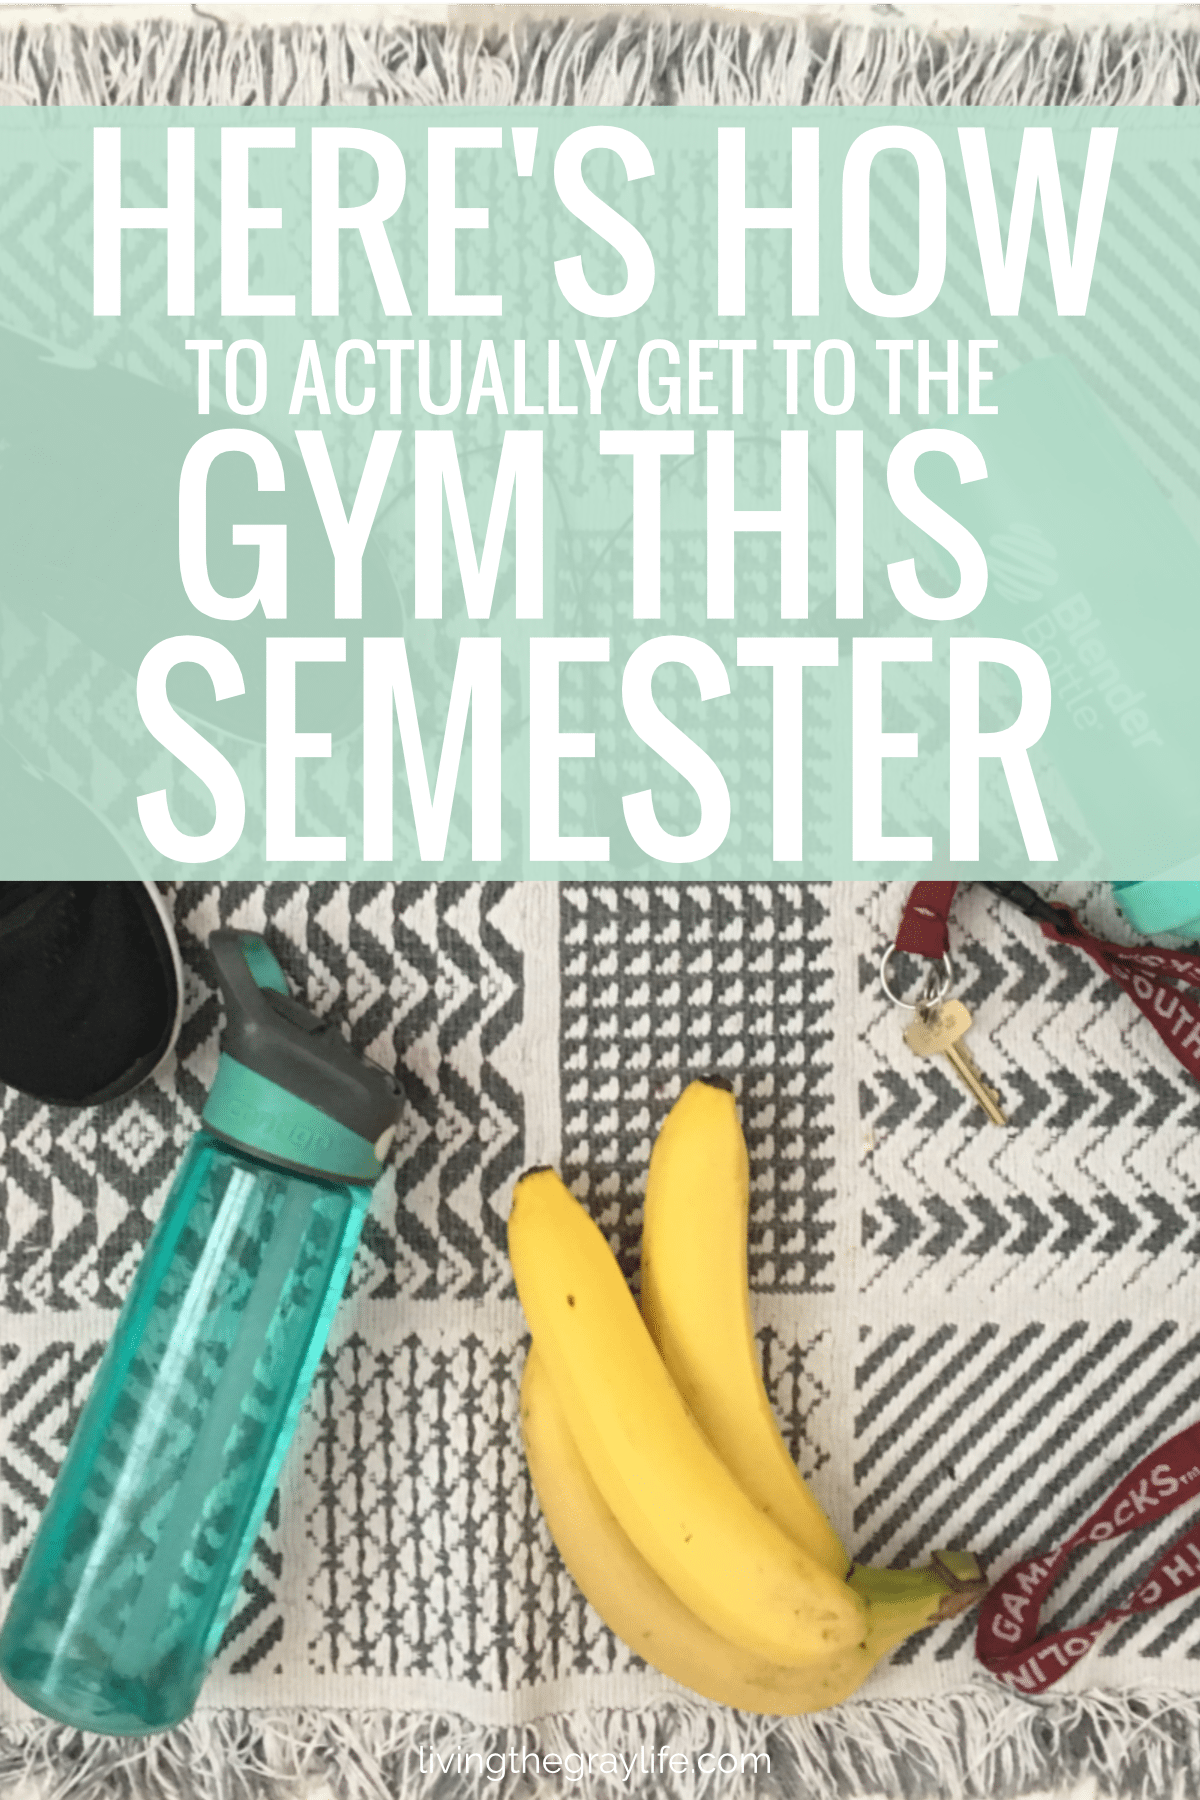 Here’s How to Actually Get to the Gym This Semester